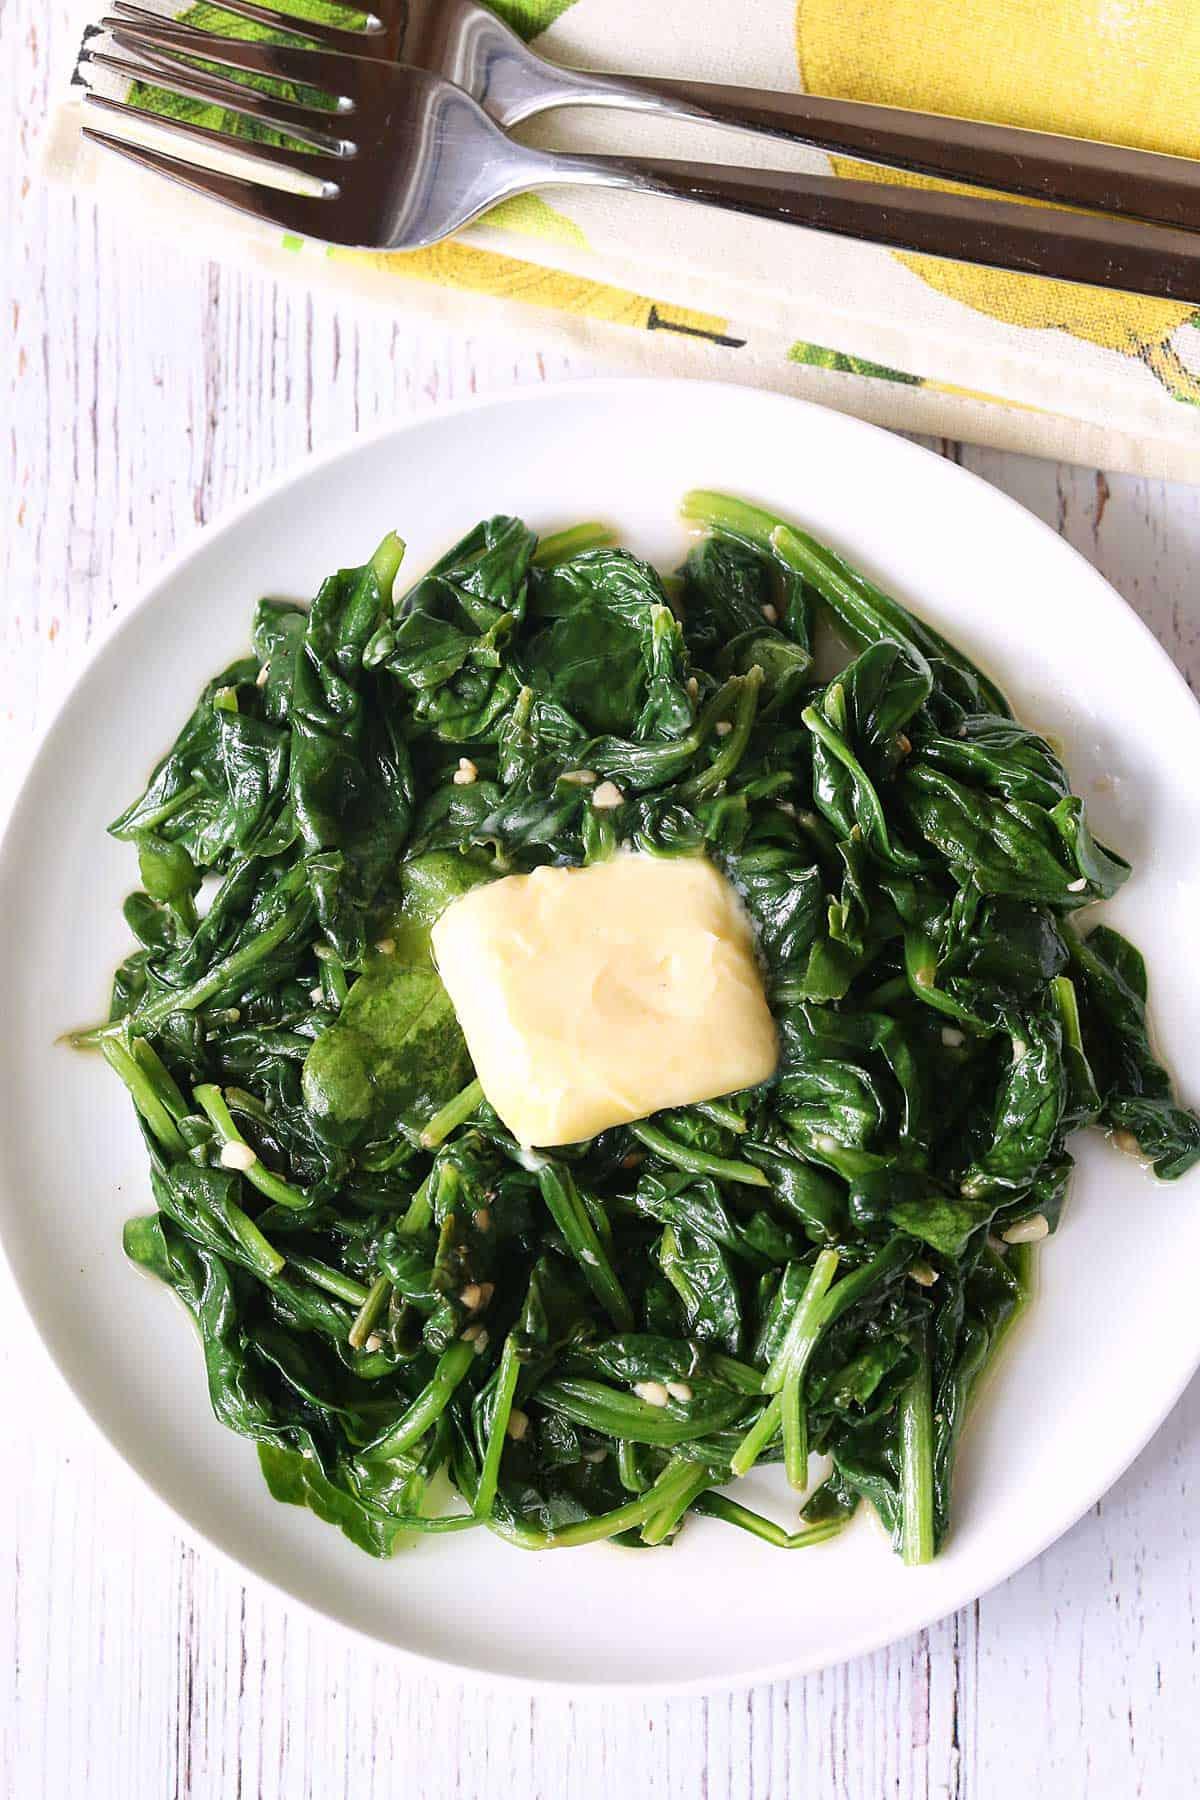 Sauteed spinach served on a white plate with a napkin and forks.